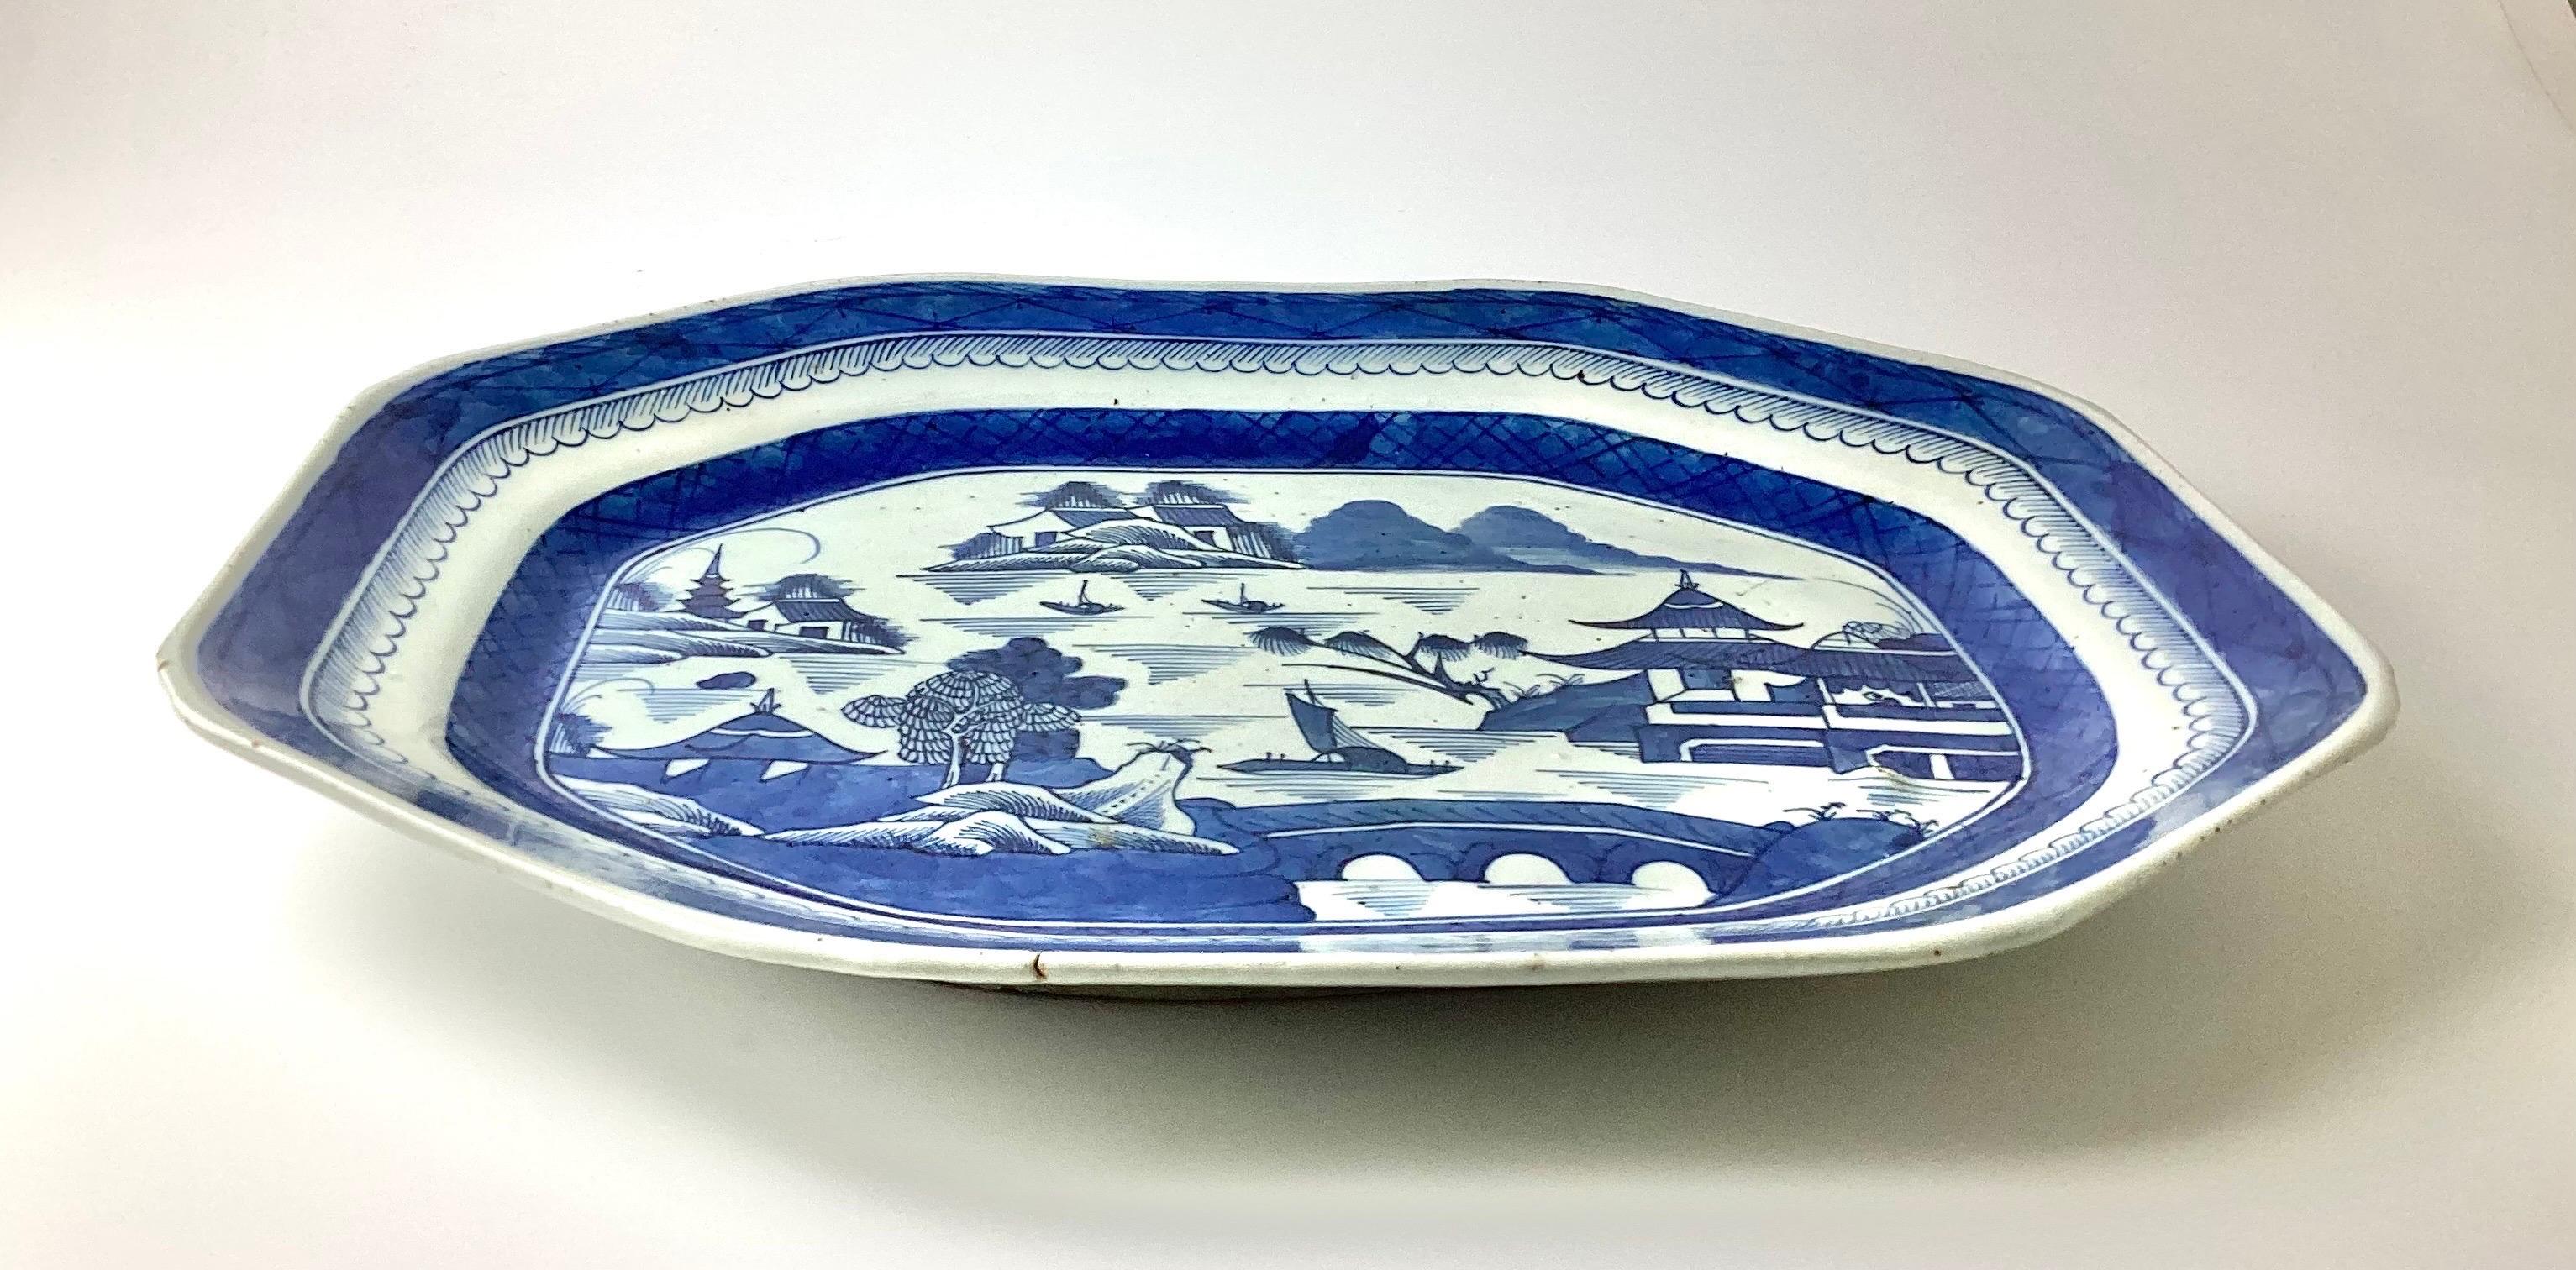 Antique Chinese canton porcelain blue export serving platter. Very good condition with some marks in the porcelain and glaze. Please note images, small fire mark on rim and bubble under the clay. Some writing on the back in pencil I can not read.